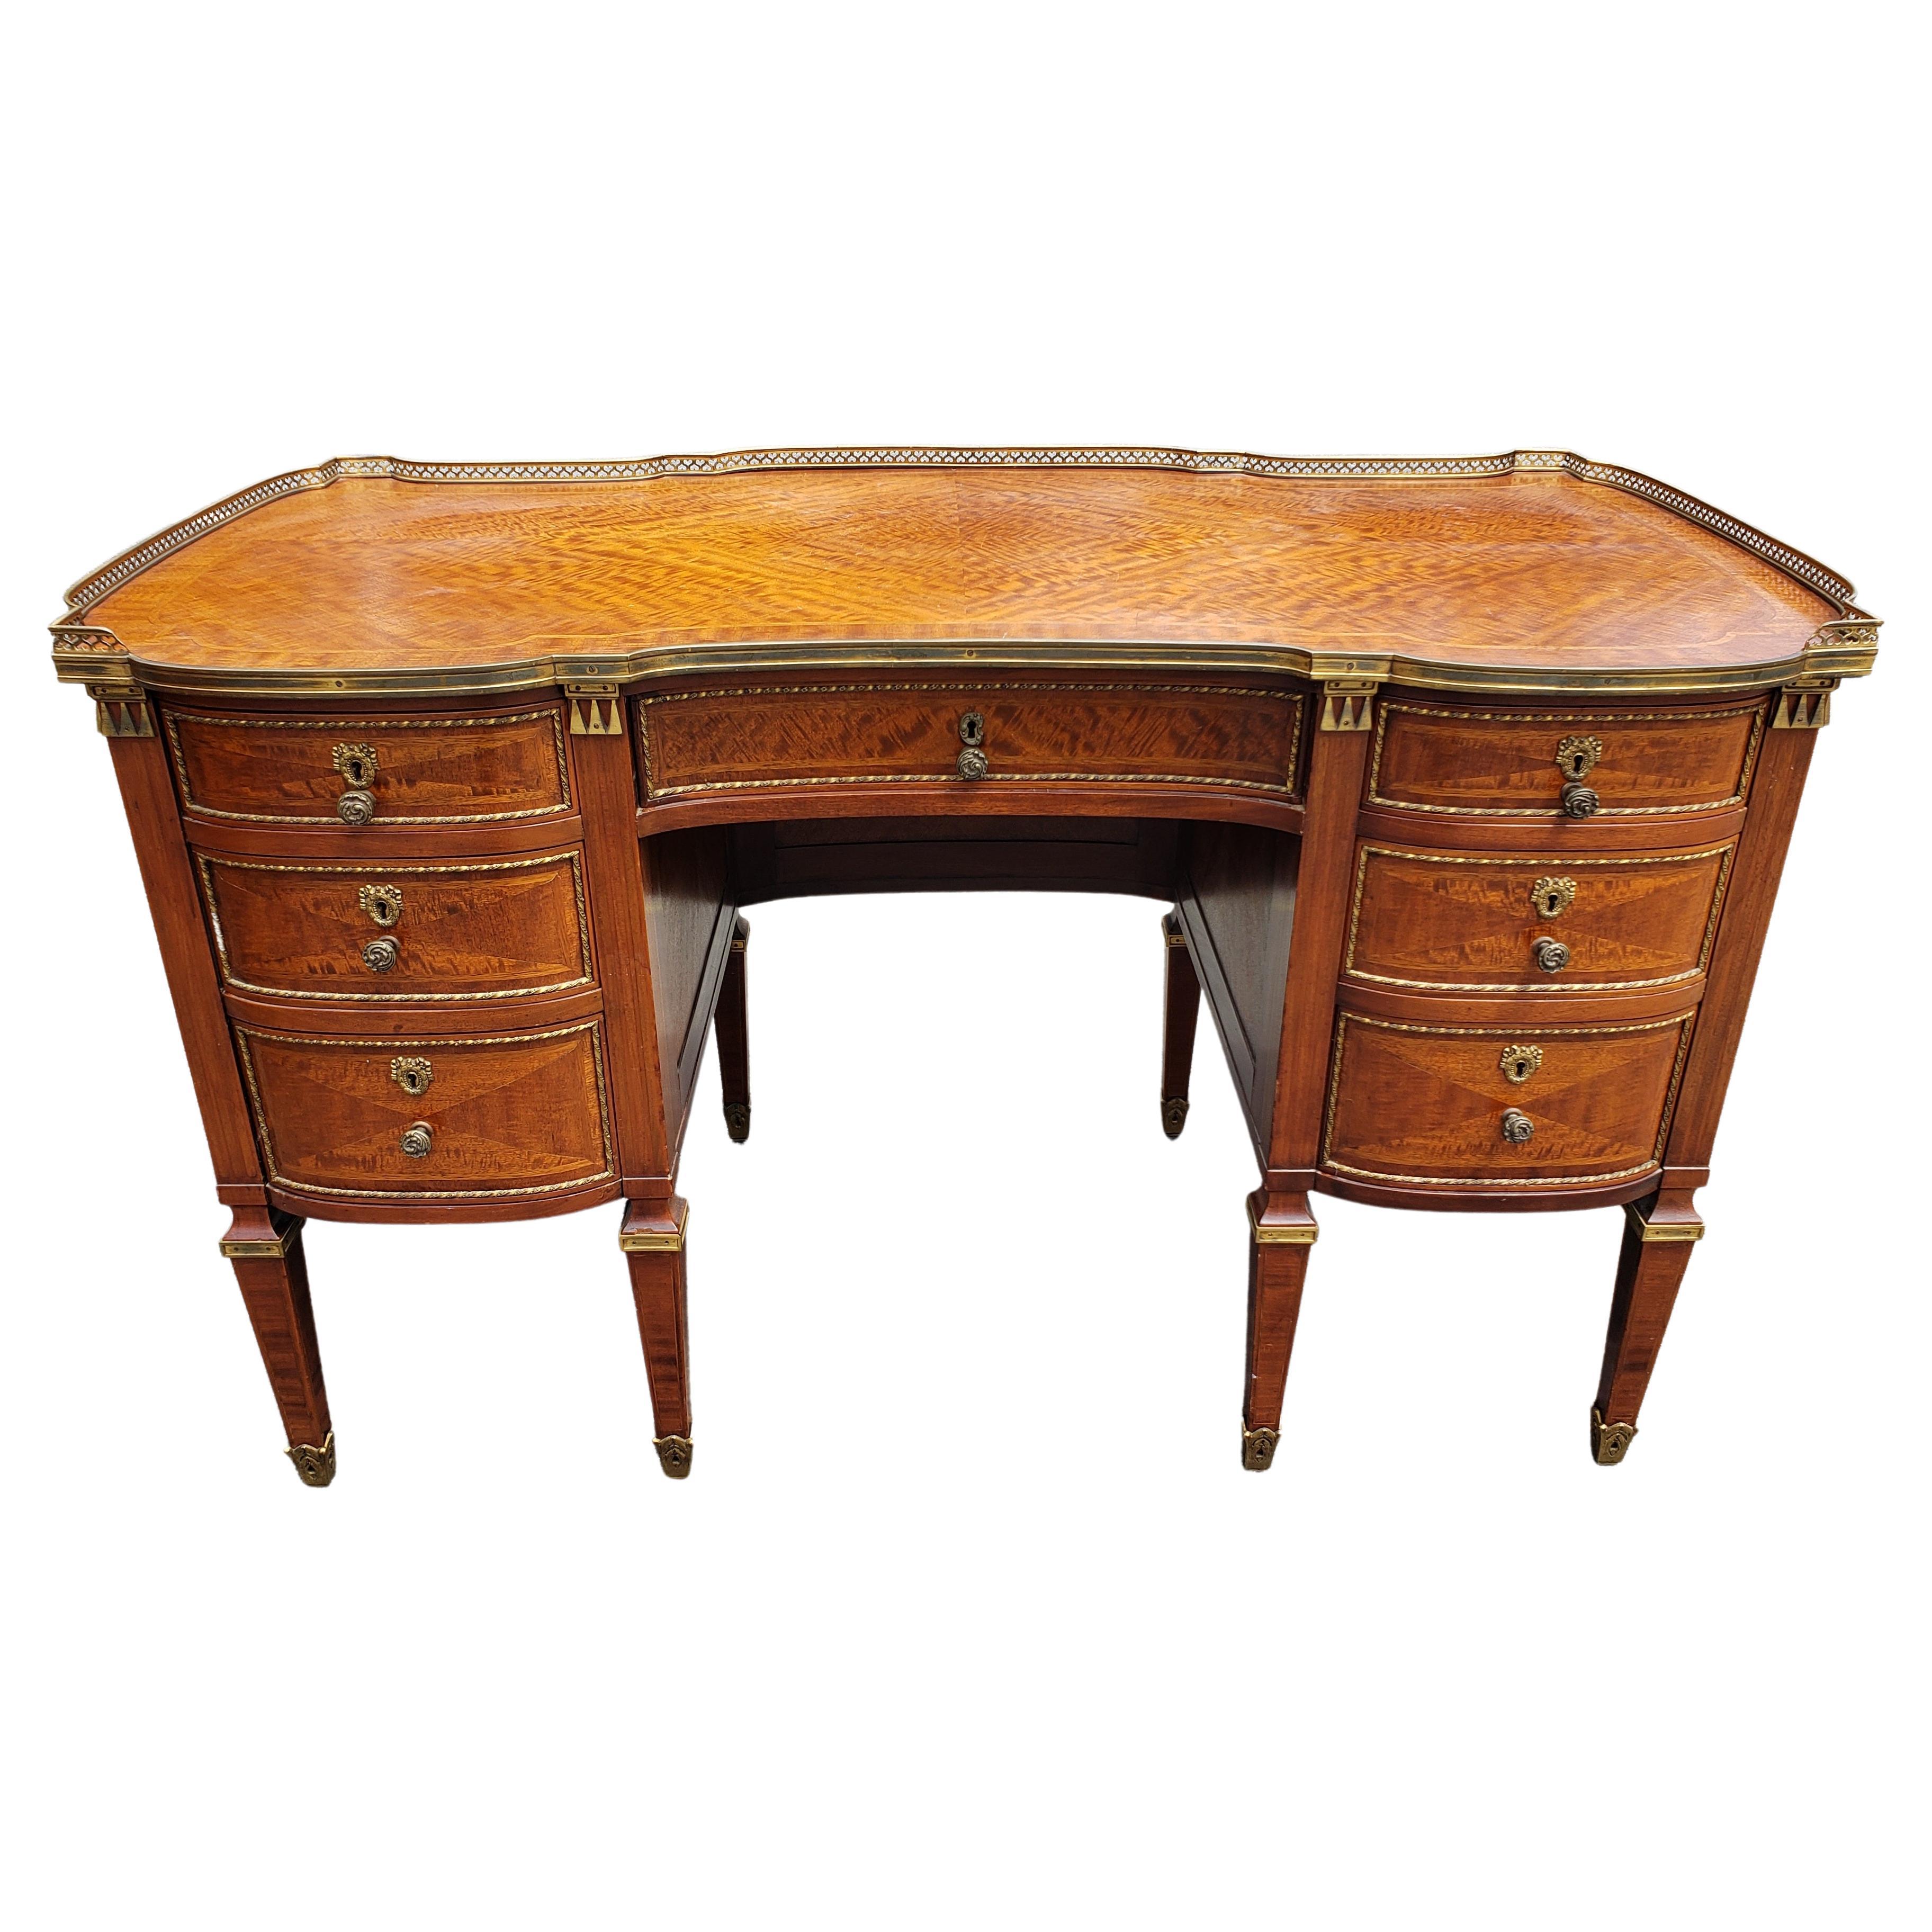 Louis XVI Style Ormolu Mounted Galleried Mahogany Burl and Marquetry Desk  For Sale